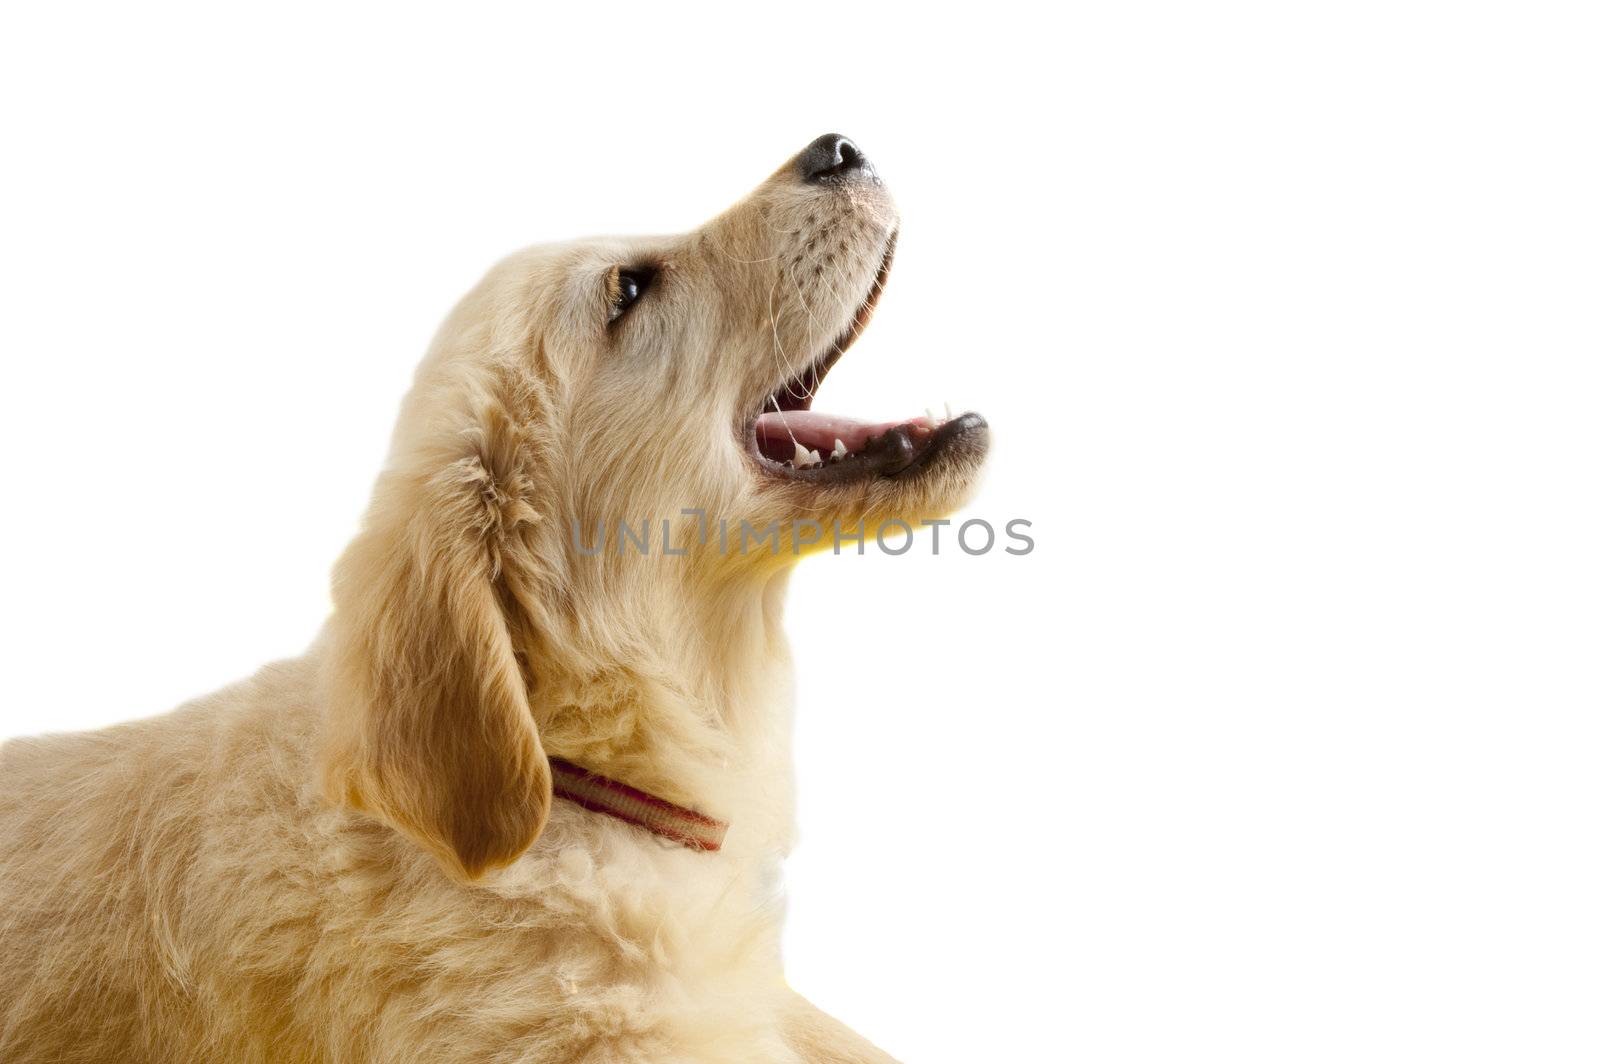 Golden retriever puppy with open mouth by ladyminnie